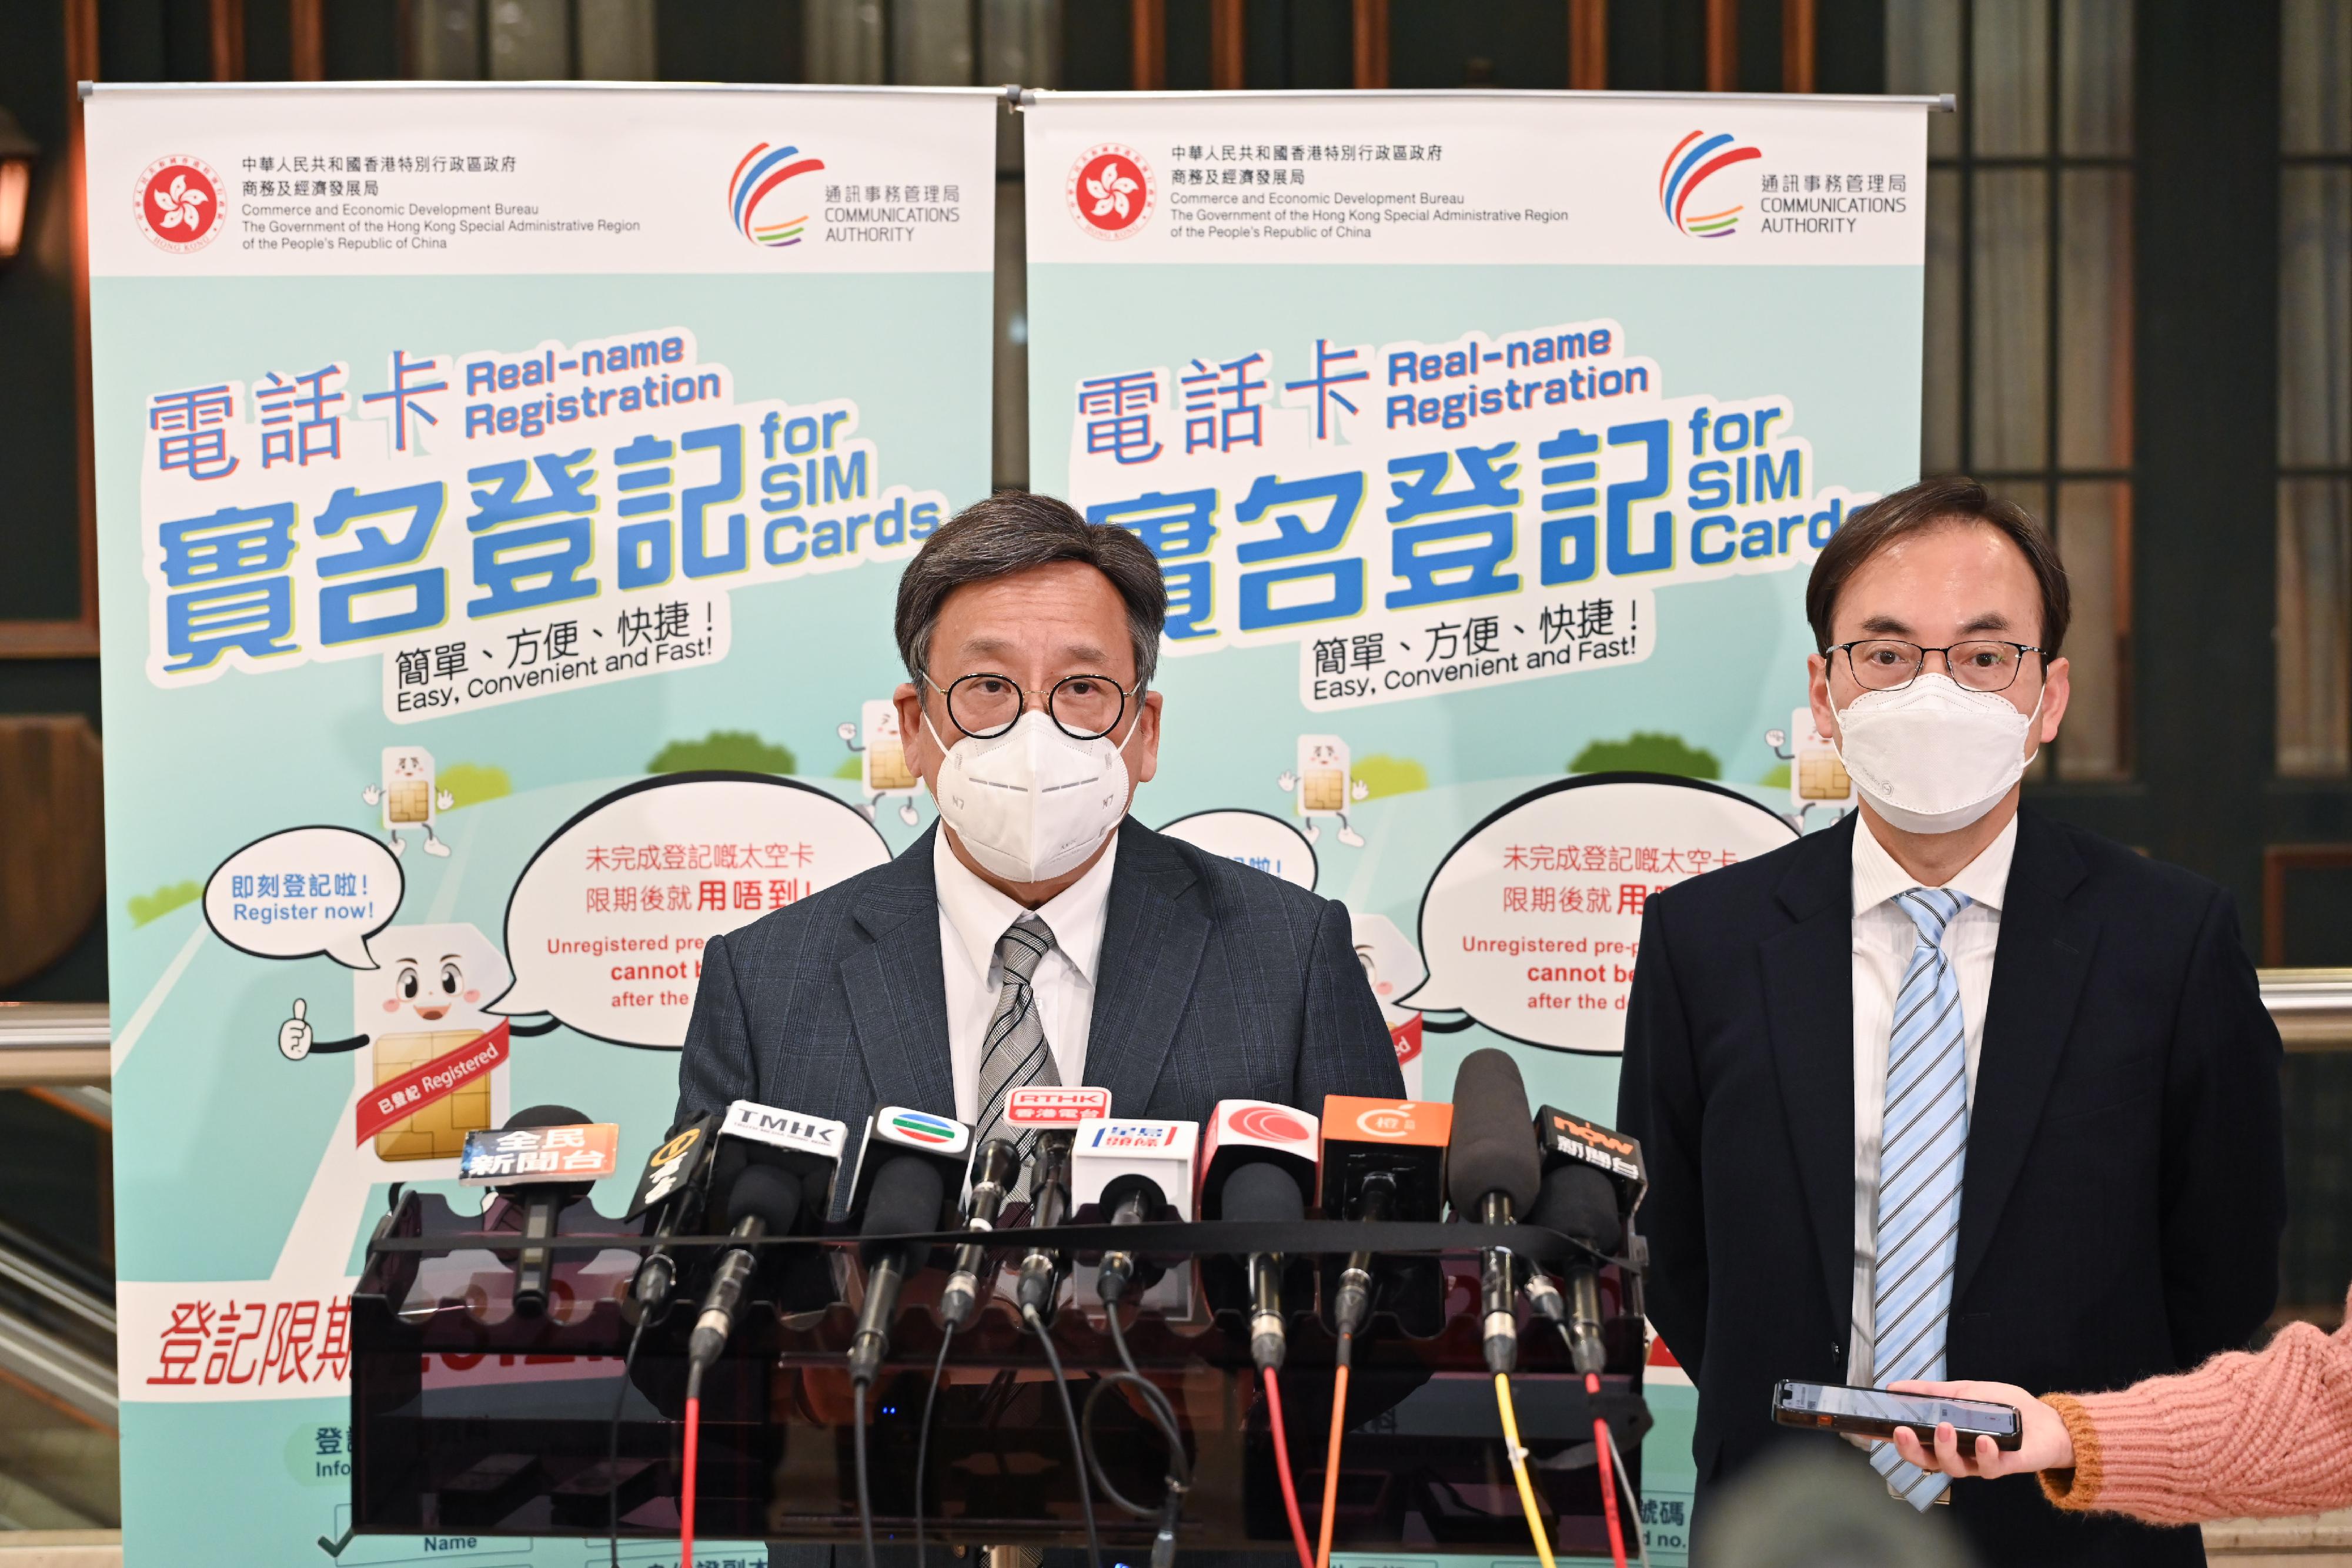 The Secretary for Commerce and Economic Development, Mr Algernon Yau (left), met the media this afternoon (February 16) after visiting Wan Chai Post Office to view the operation of the support service for real-name registration for SIM cards. Looking on is the Director-General of Communications, Mr Chaucer Leung.